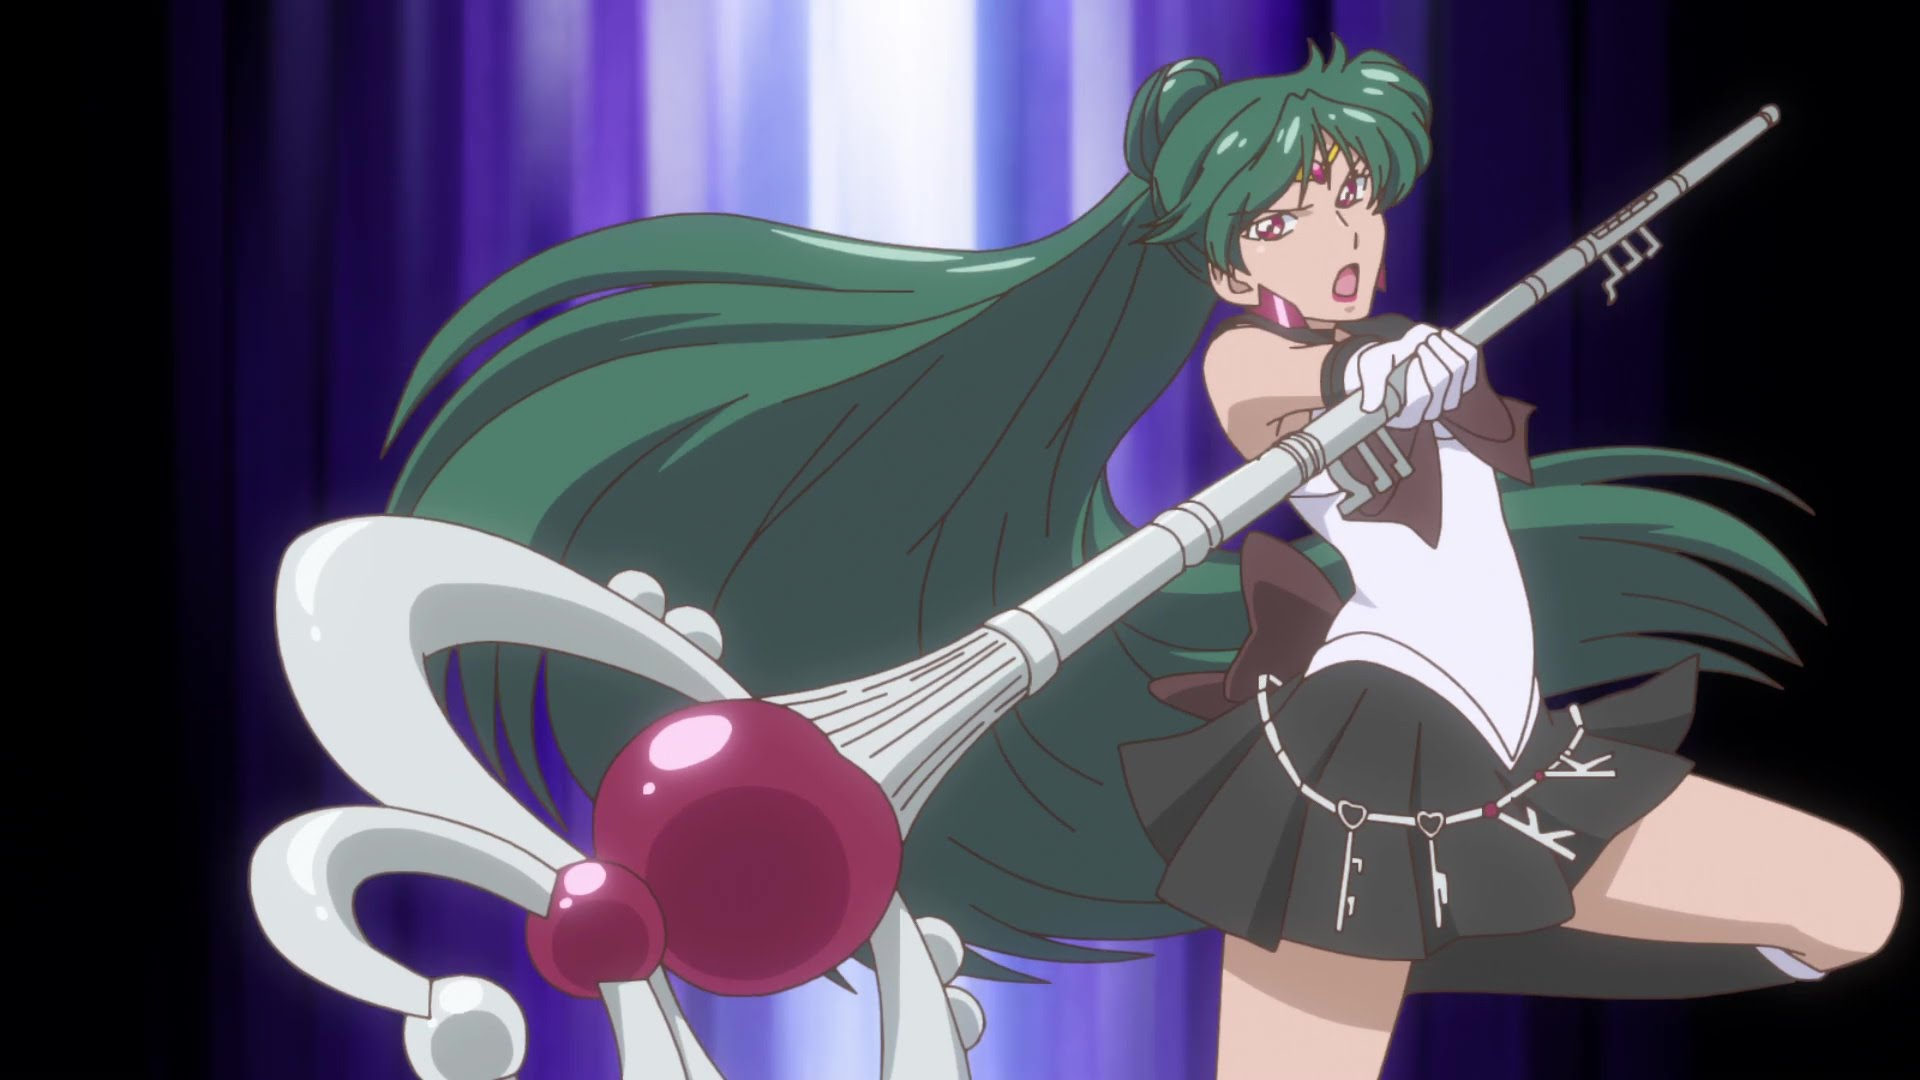 1920x1080 Why Does Sailor Pluto Look Different From the Rest? | Tuxedo Unmasked